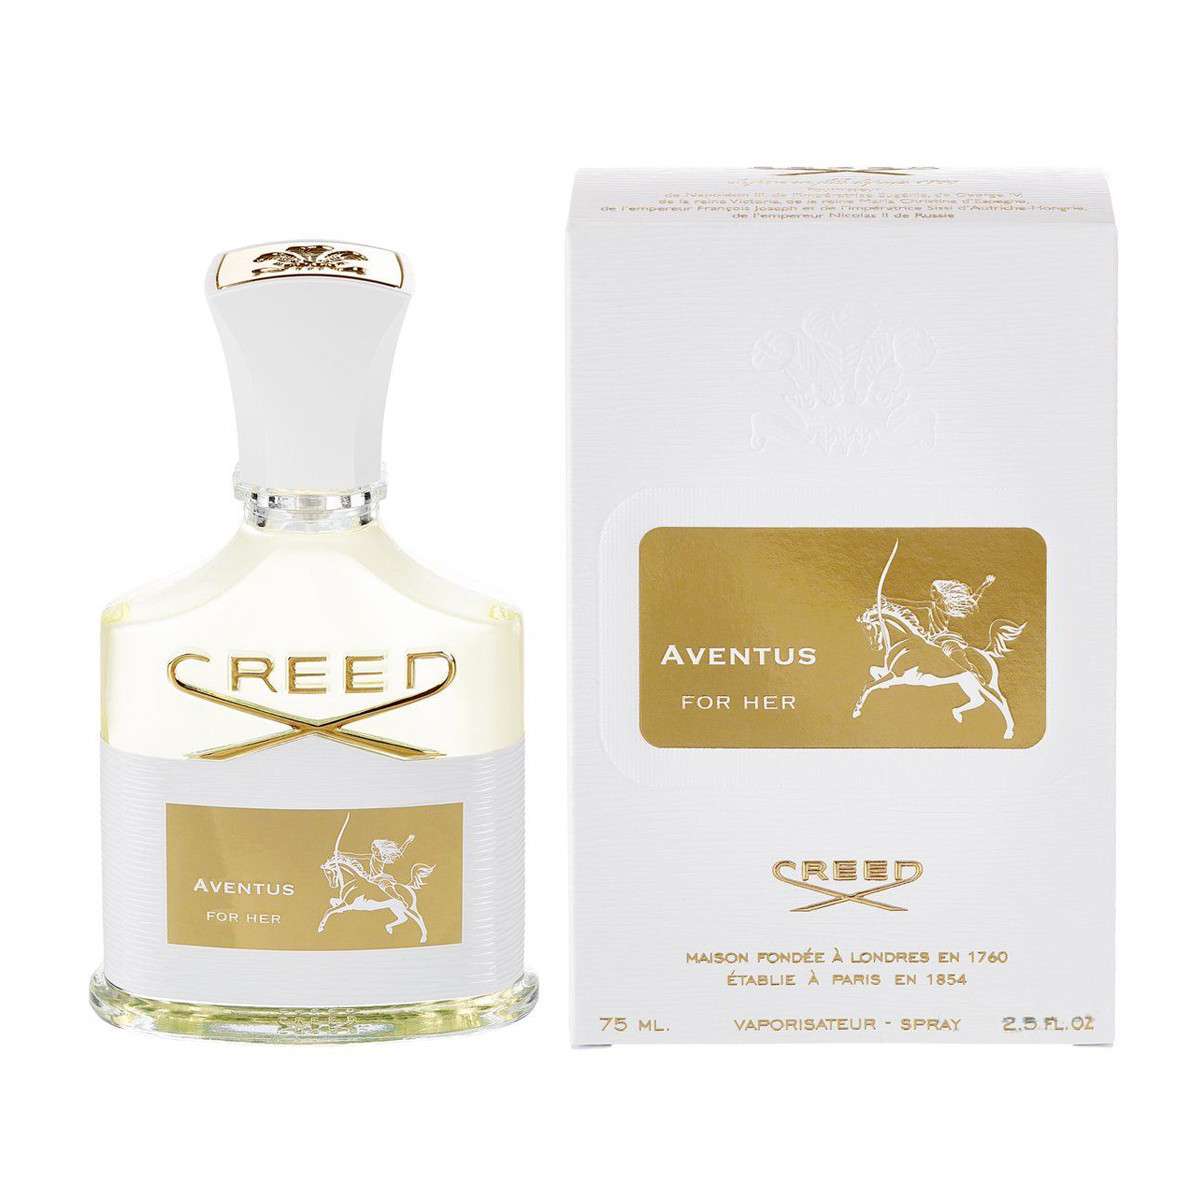 Creed "Aventus For Her" 75 ml